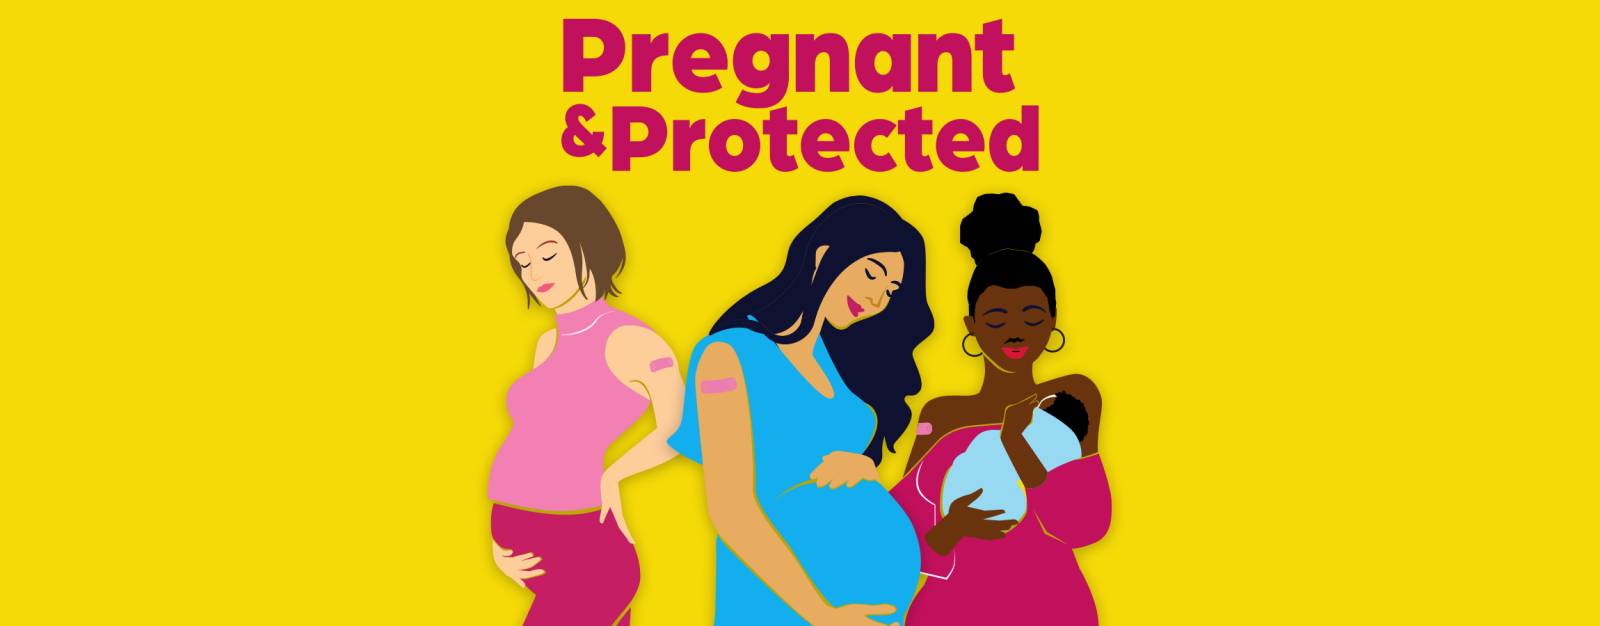 Pregnant and Protected from COVID-19